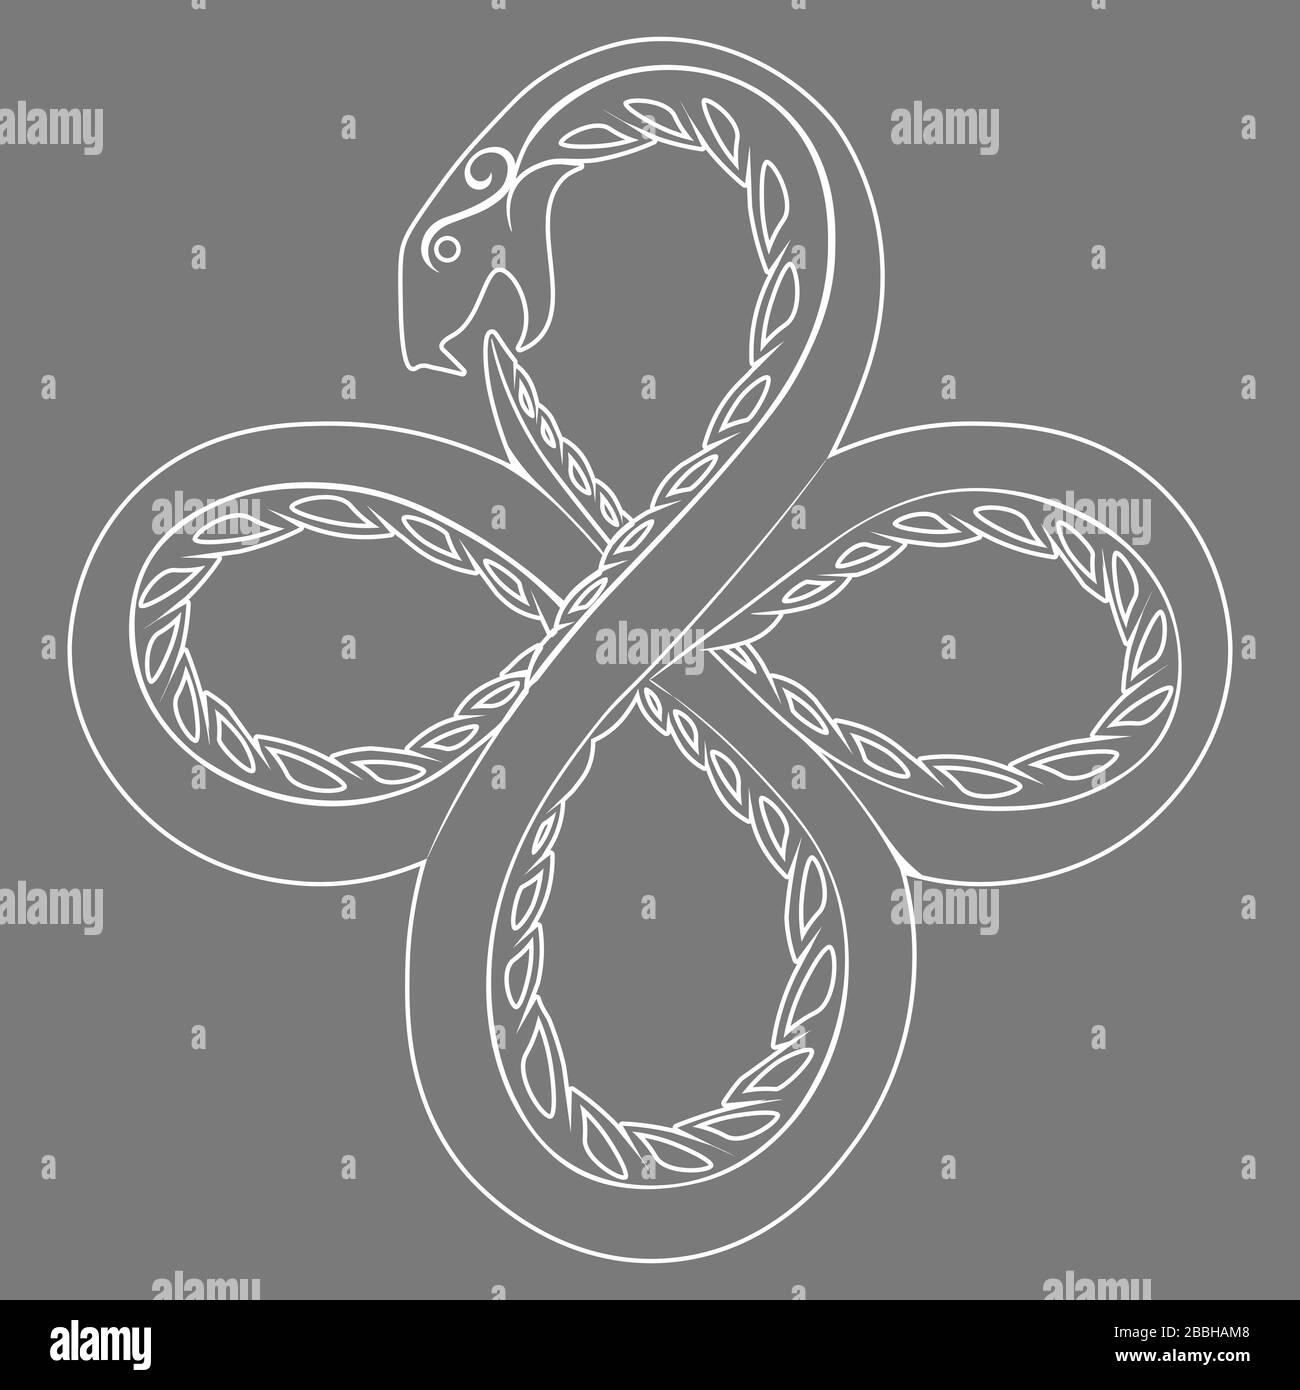 White contour illustration of occult symbol ouroboros serpent on grey background Stock Vector